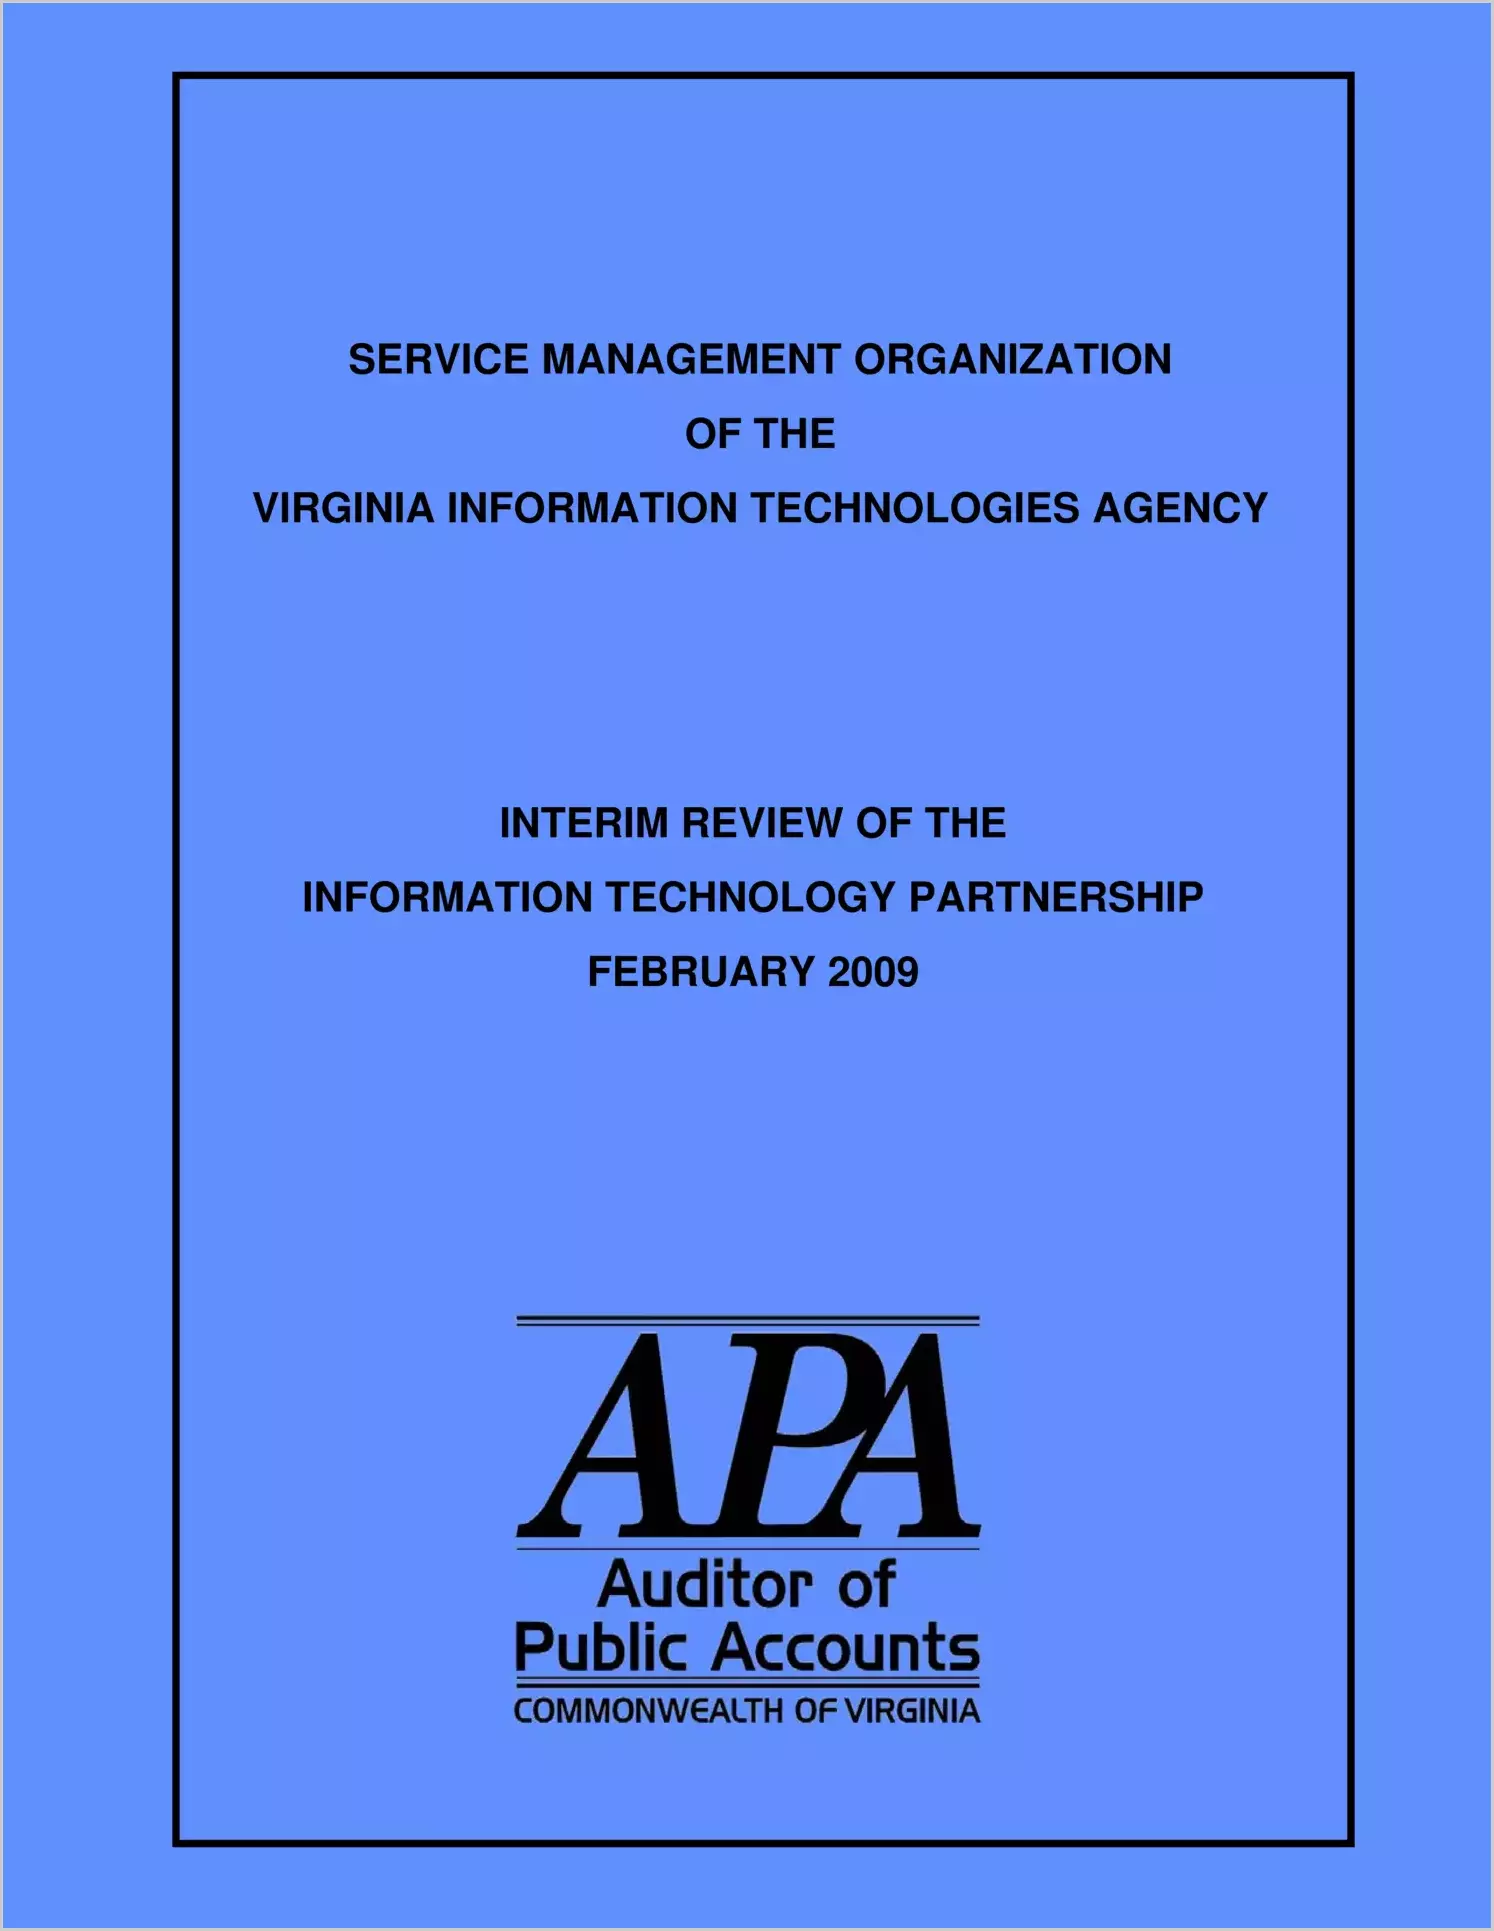 Service Management Organization of the Virginia Information Technologies Agency Interim Review of the Information Technology Partnership February 2009